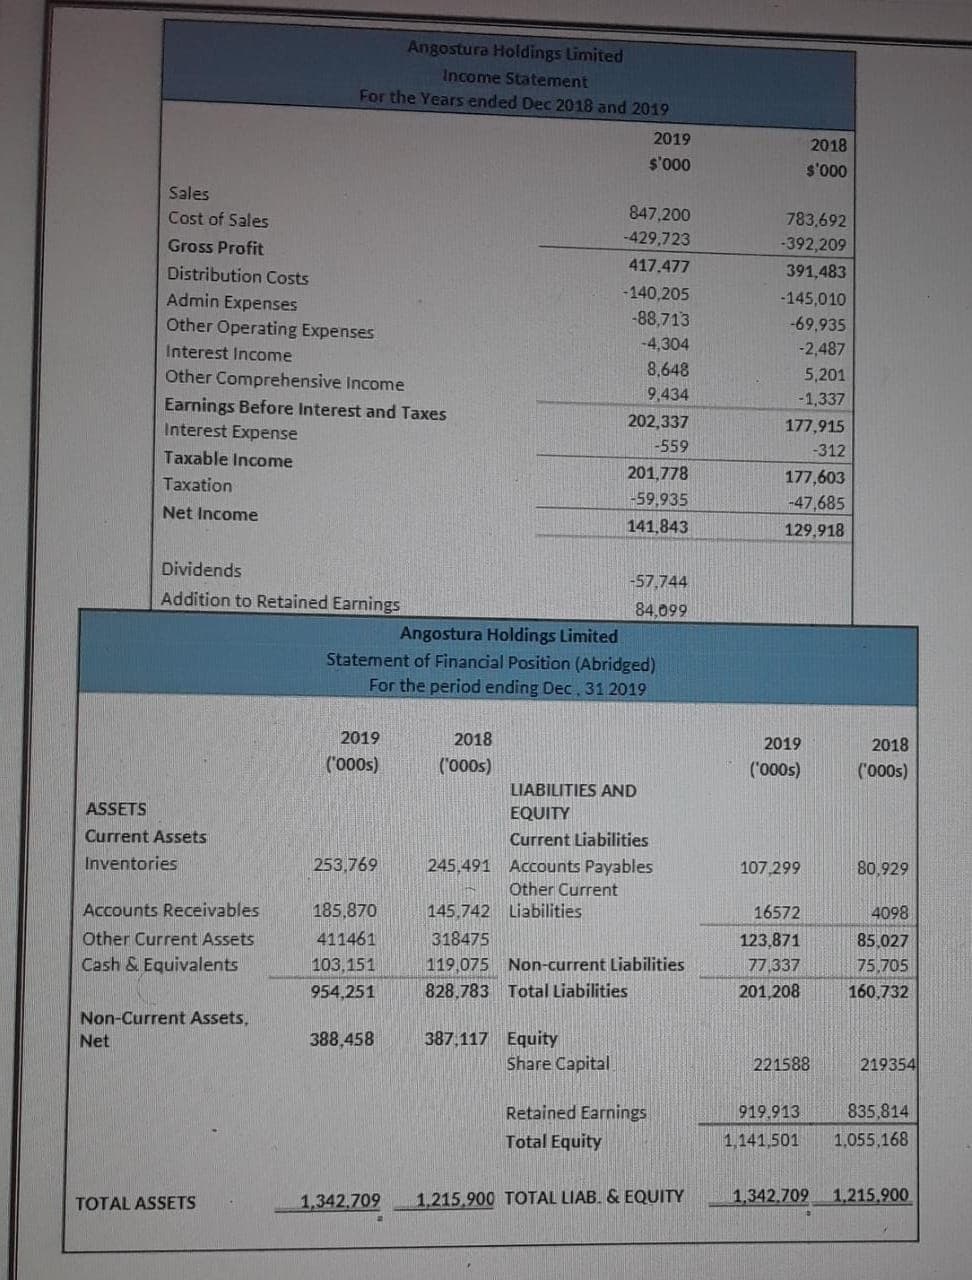 Angostura Holdings Limited
Income Statement
For the Years ended Dec 2018 and 2019
2019
2018
s'00
000,$
Sales
Cost of Sales
847,200
783,692
Gross Profit
-429,723
-392,209
Distribution Costs
417.477
391,483
-140,205
Admin Expenses
Other Operating Expenses
-145,010
-88,713
-69,935
Interest Income
-4,304
-2,487
Other Comprehensive Income
8,648
5,201
9.434
-1,337
Earnings Before Interest and Taxes
Interest Expense
202,337
177,915
-559
-312
Taxable Income
201,778
177,603
Taxation
-59,935
-47,685
Net Income
141,843
129,918
Dividends
-57,744
Addition to Retained Earnings
84,099
Angostura Holdings Limited
Statement of Financial Position (Abridged)
For the period ending Dec, 31 2019
2019
2018
2019
2018
('000s)
('000s)
("000s)
("000s)
LIABILITIES AND
ASSETS
EQUITY
Current Assets
Current Liabilities
Inventories
253,769
245,491 Accounts Payables
Other Current
107 299
80,929
Accounts Receivables
185,870
145.742 Liabilities
16572
4098
Other Current Assets
411461
318475
123,871
85.027
Cash & Equivalents
103,151
119,075 Non-current Liabilities
77,337
75,705
954,251
828,783 Total Liabilities
201,208
160.732
Non-Current Assets,
387,117 Equity
Share Capital
Net
388.458
221588
219354
Retained Earnings
919.913
835,814
Total Equity
1,141.501
1,055,168
TOTAL ASSETS
1,342,709
1,215.900 TOTAL LIAB. & EQUITY
1,342.709
1,215.900
